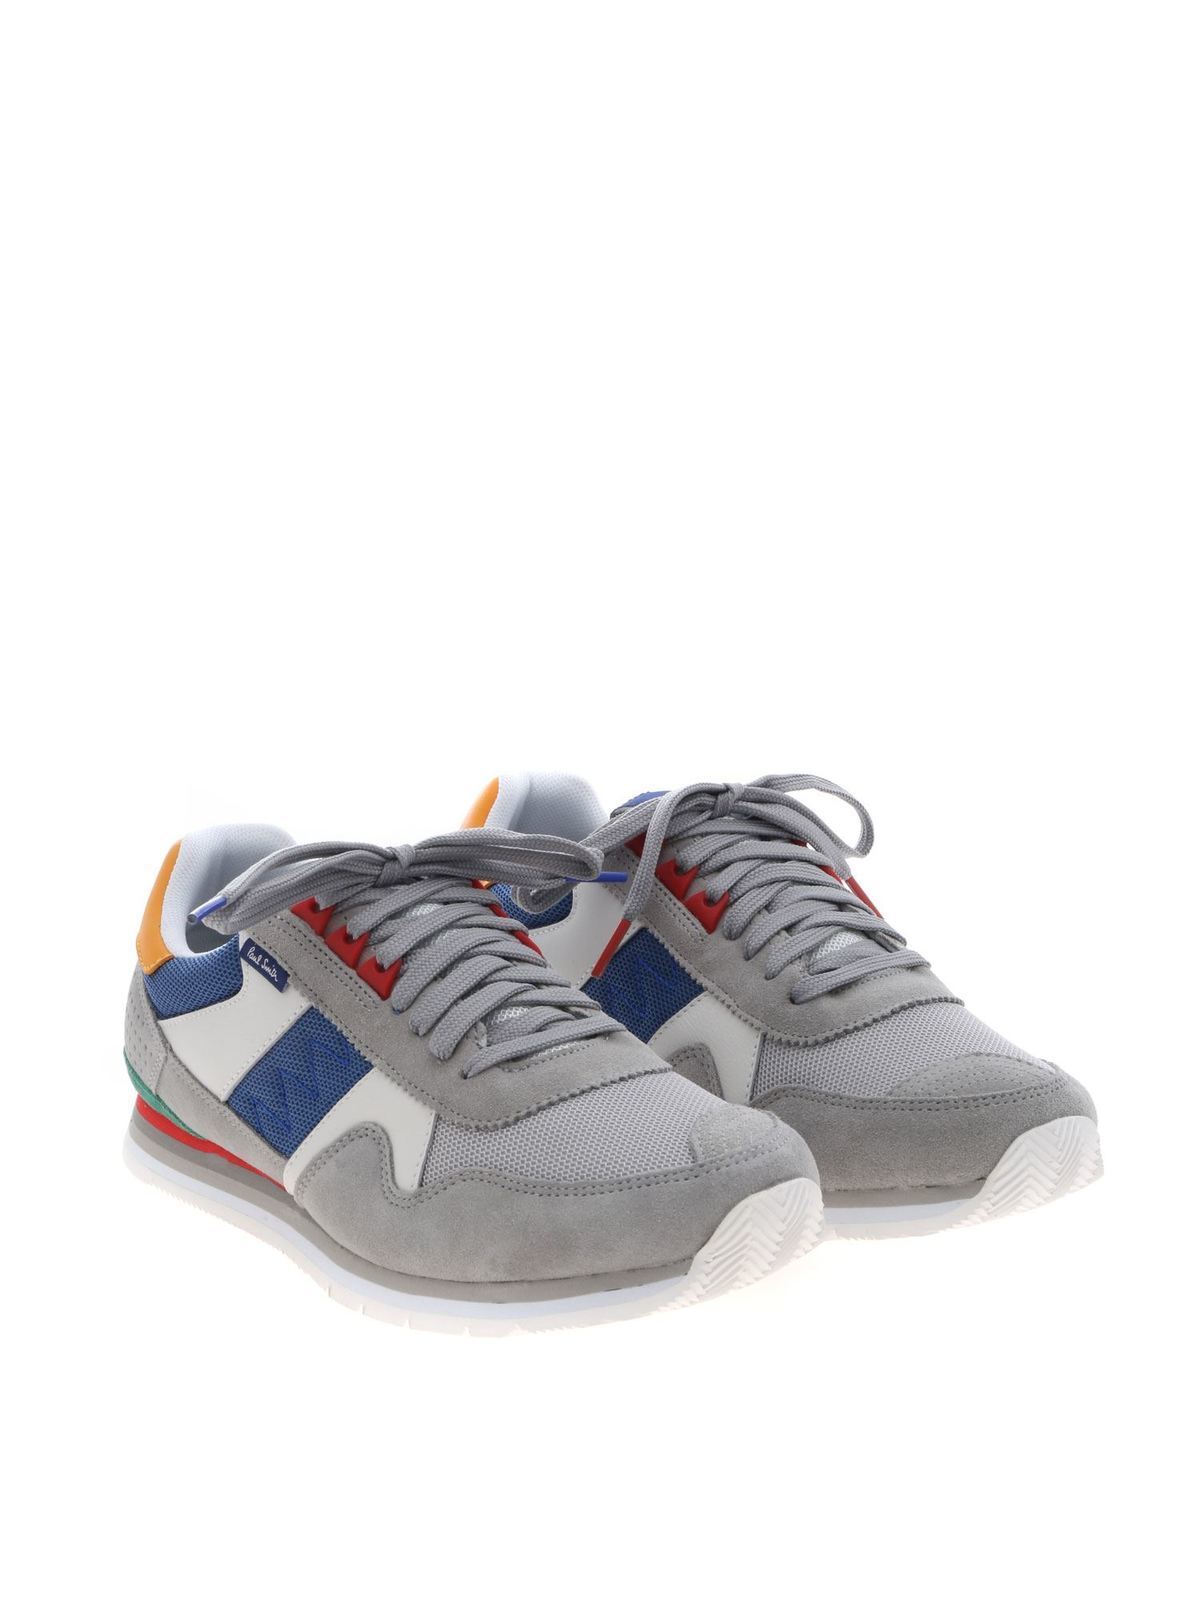 Arbitrage opslag Handschrift Trainers Ps by Paul Smith - Vinny sneakers in grey suede - M2SVIN11AVES92